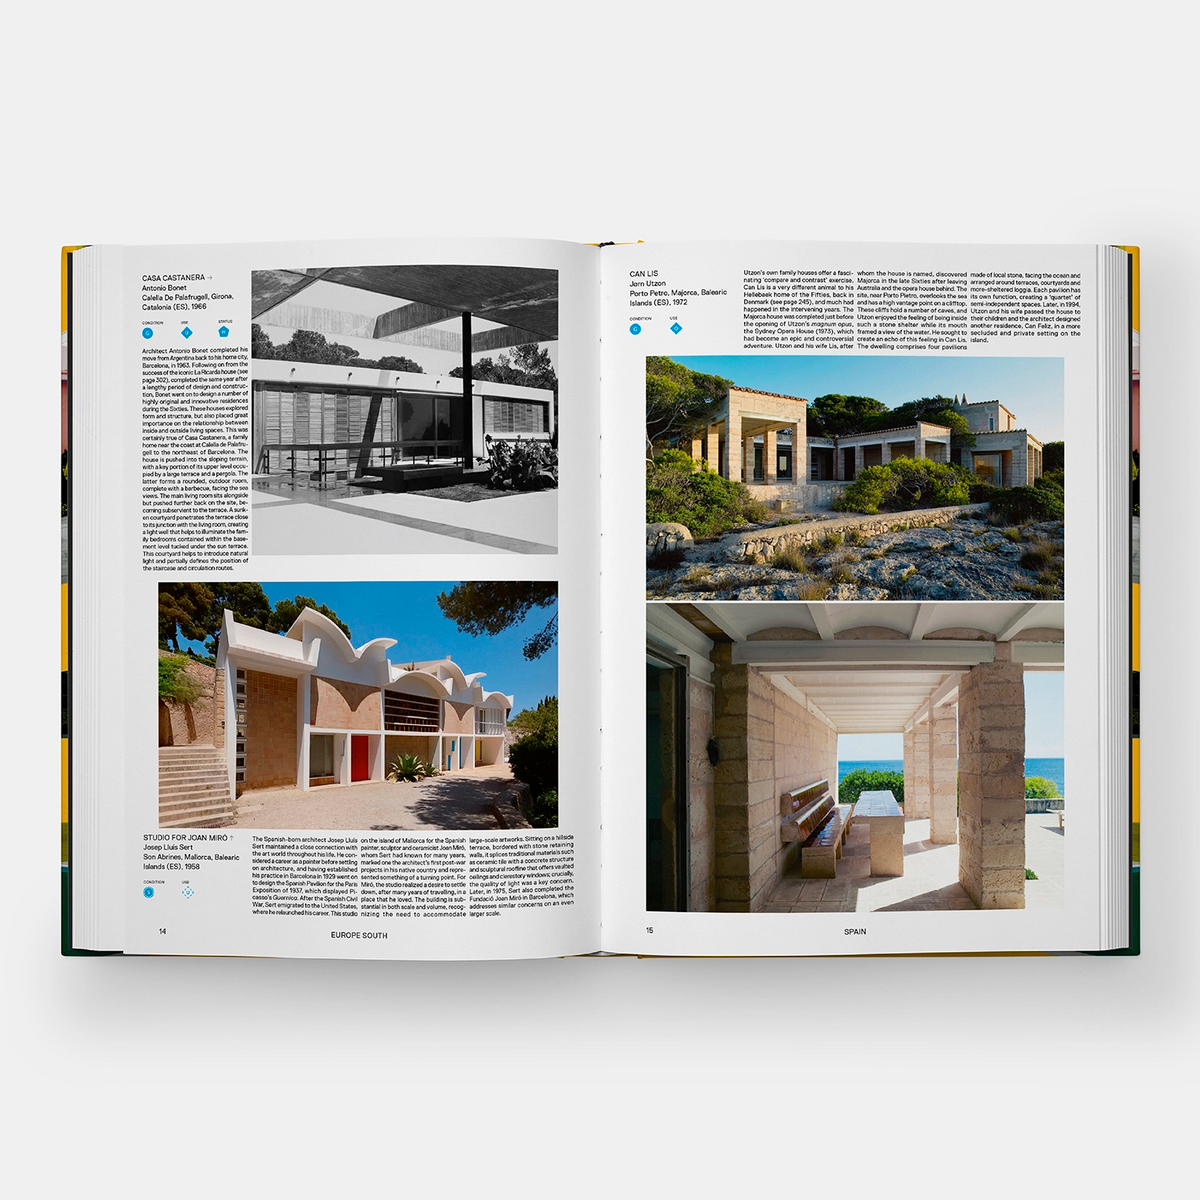 Multiple photos of outdoor patios with stone columns in Atlas of Mid-Century Modern Houses.